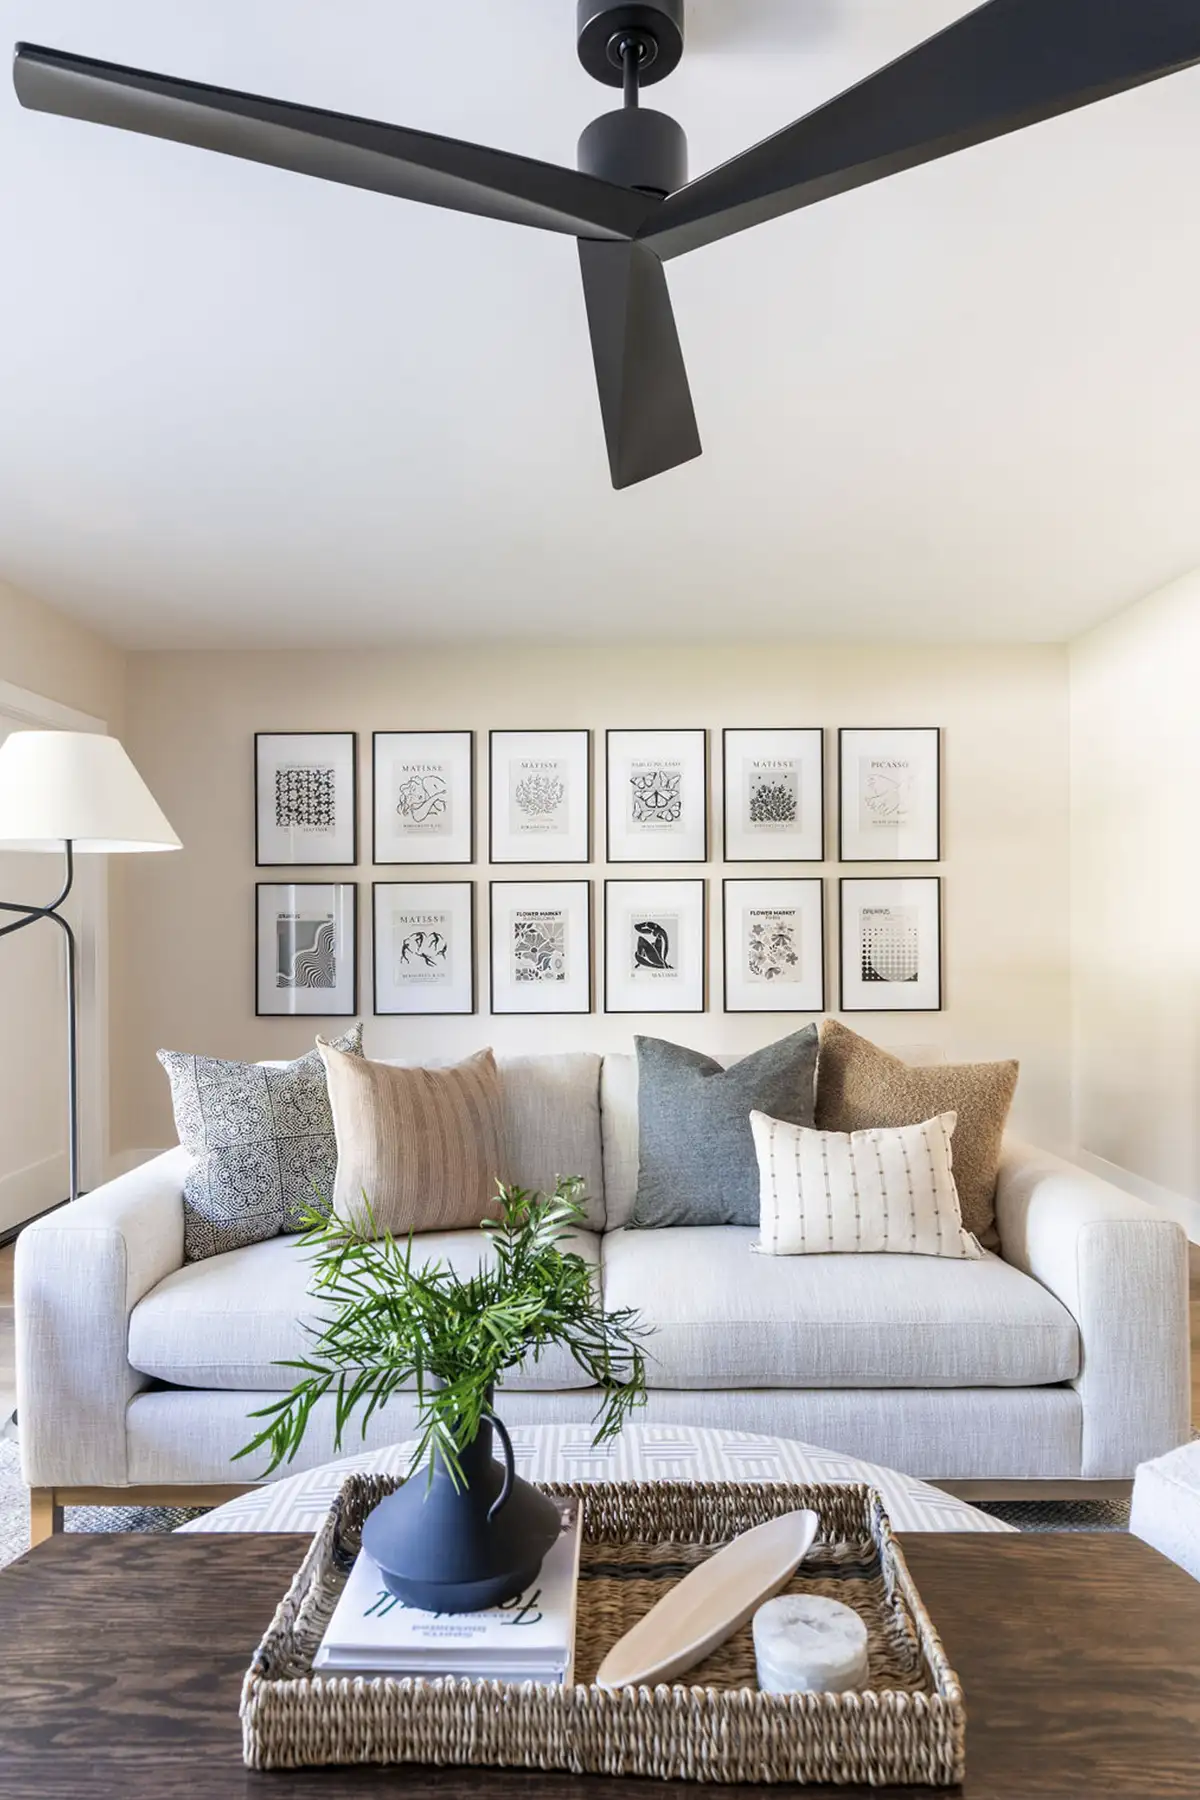 Interior design of a living room with 12 pieces of artwork on the wall behind a light couch with neutral colored pillows and a natural wood coffee table